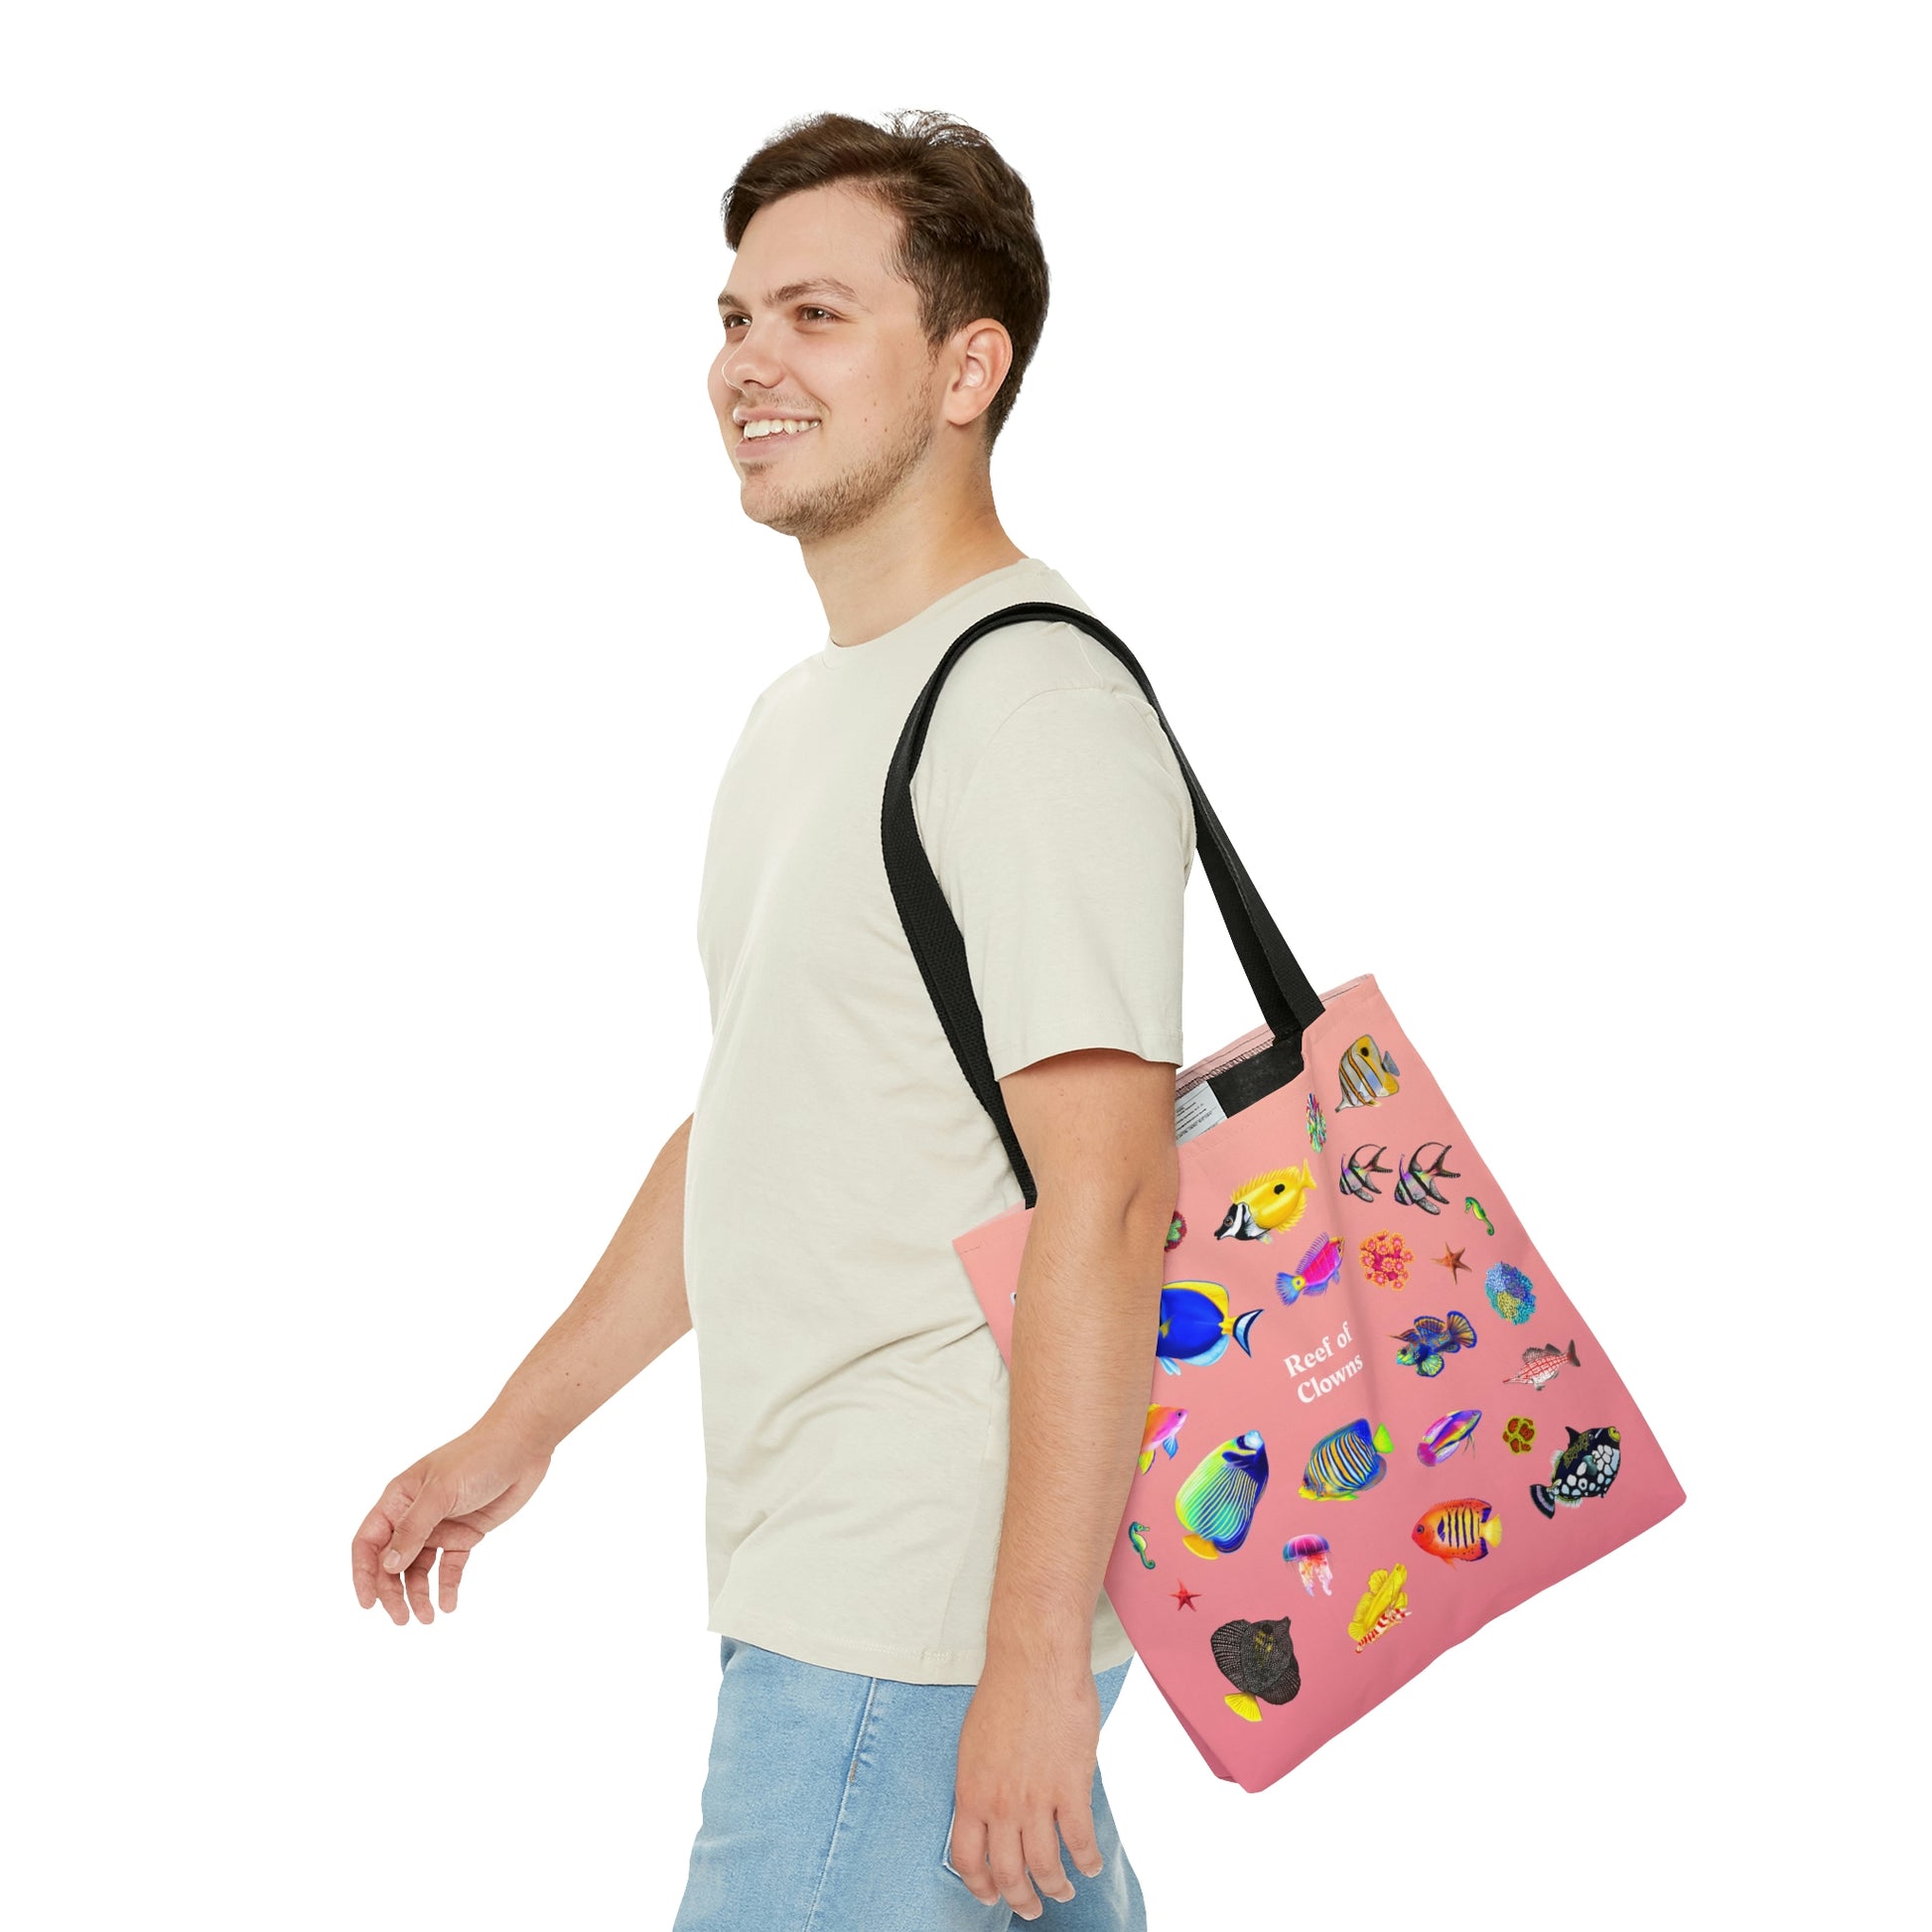 The World of Fish & Corals Bag (Peach) - Reef of Clowns